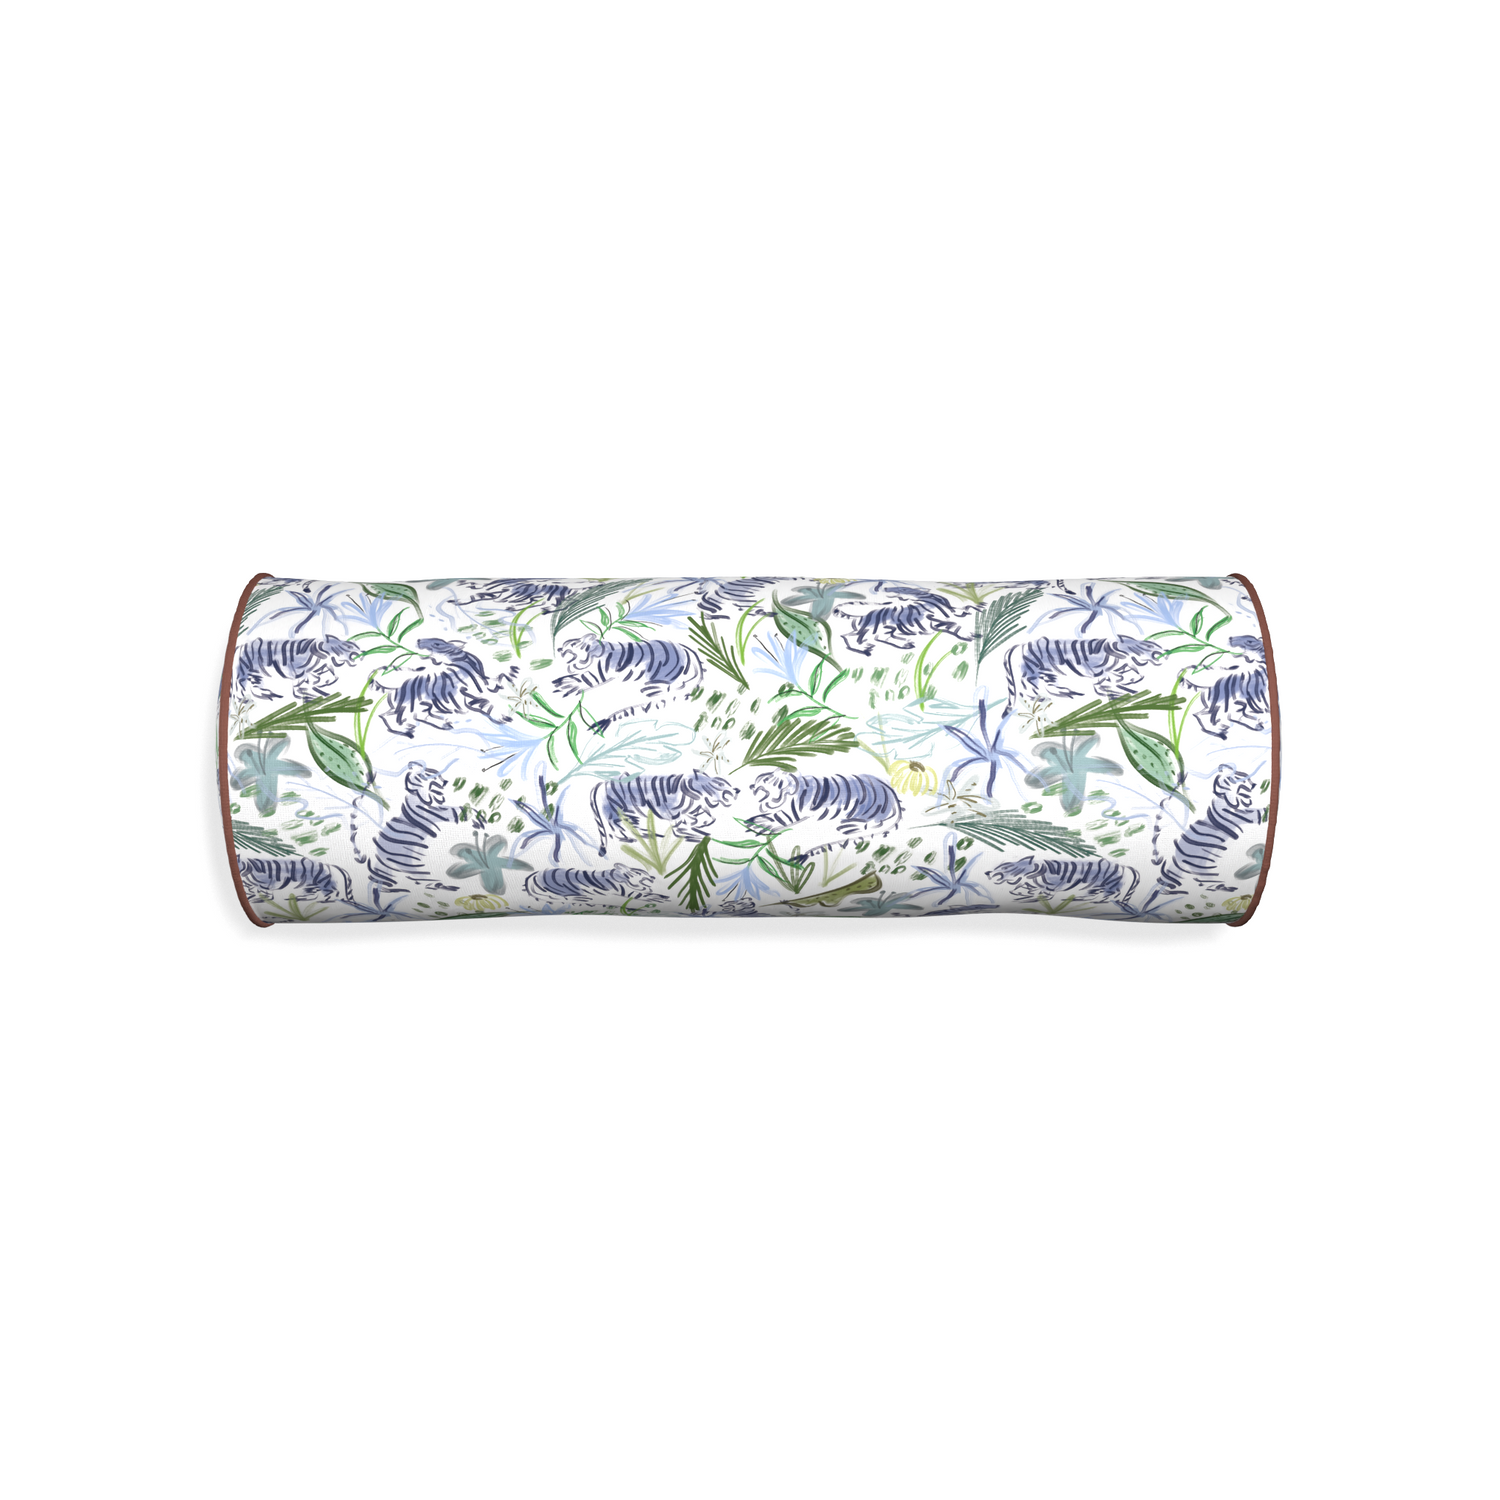 Bolster frida green custom pillow with w piping on white background